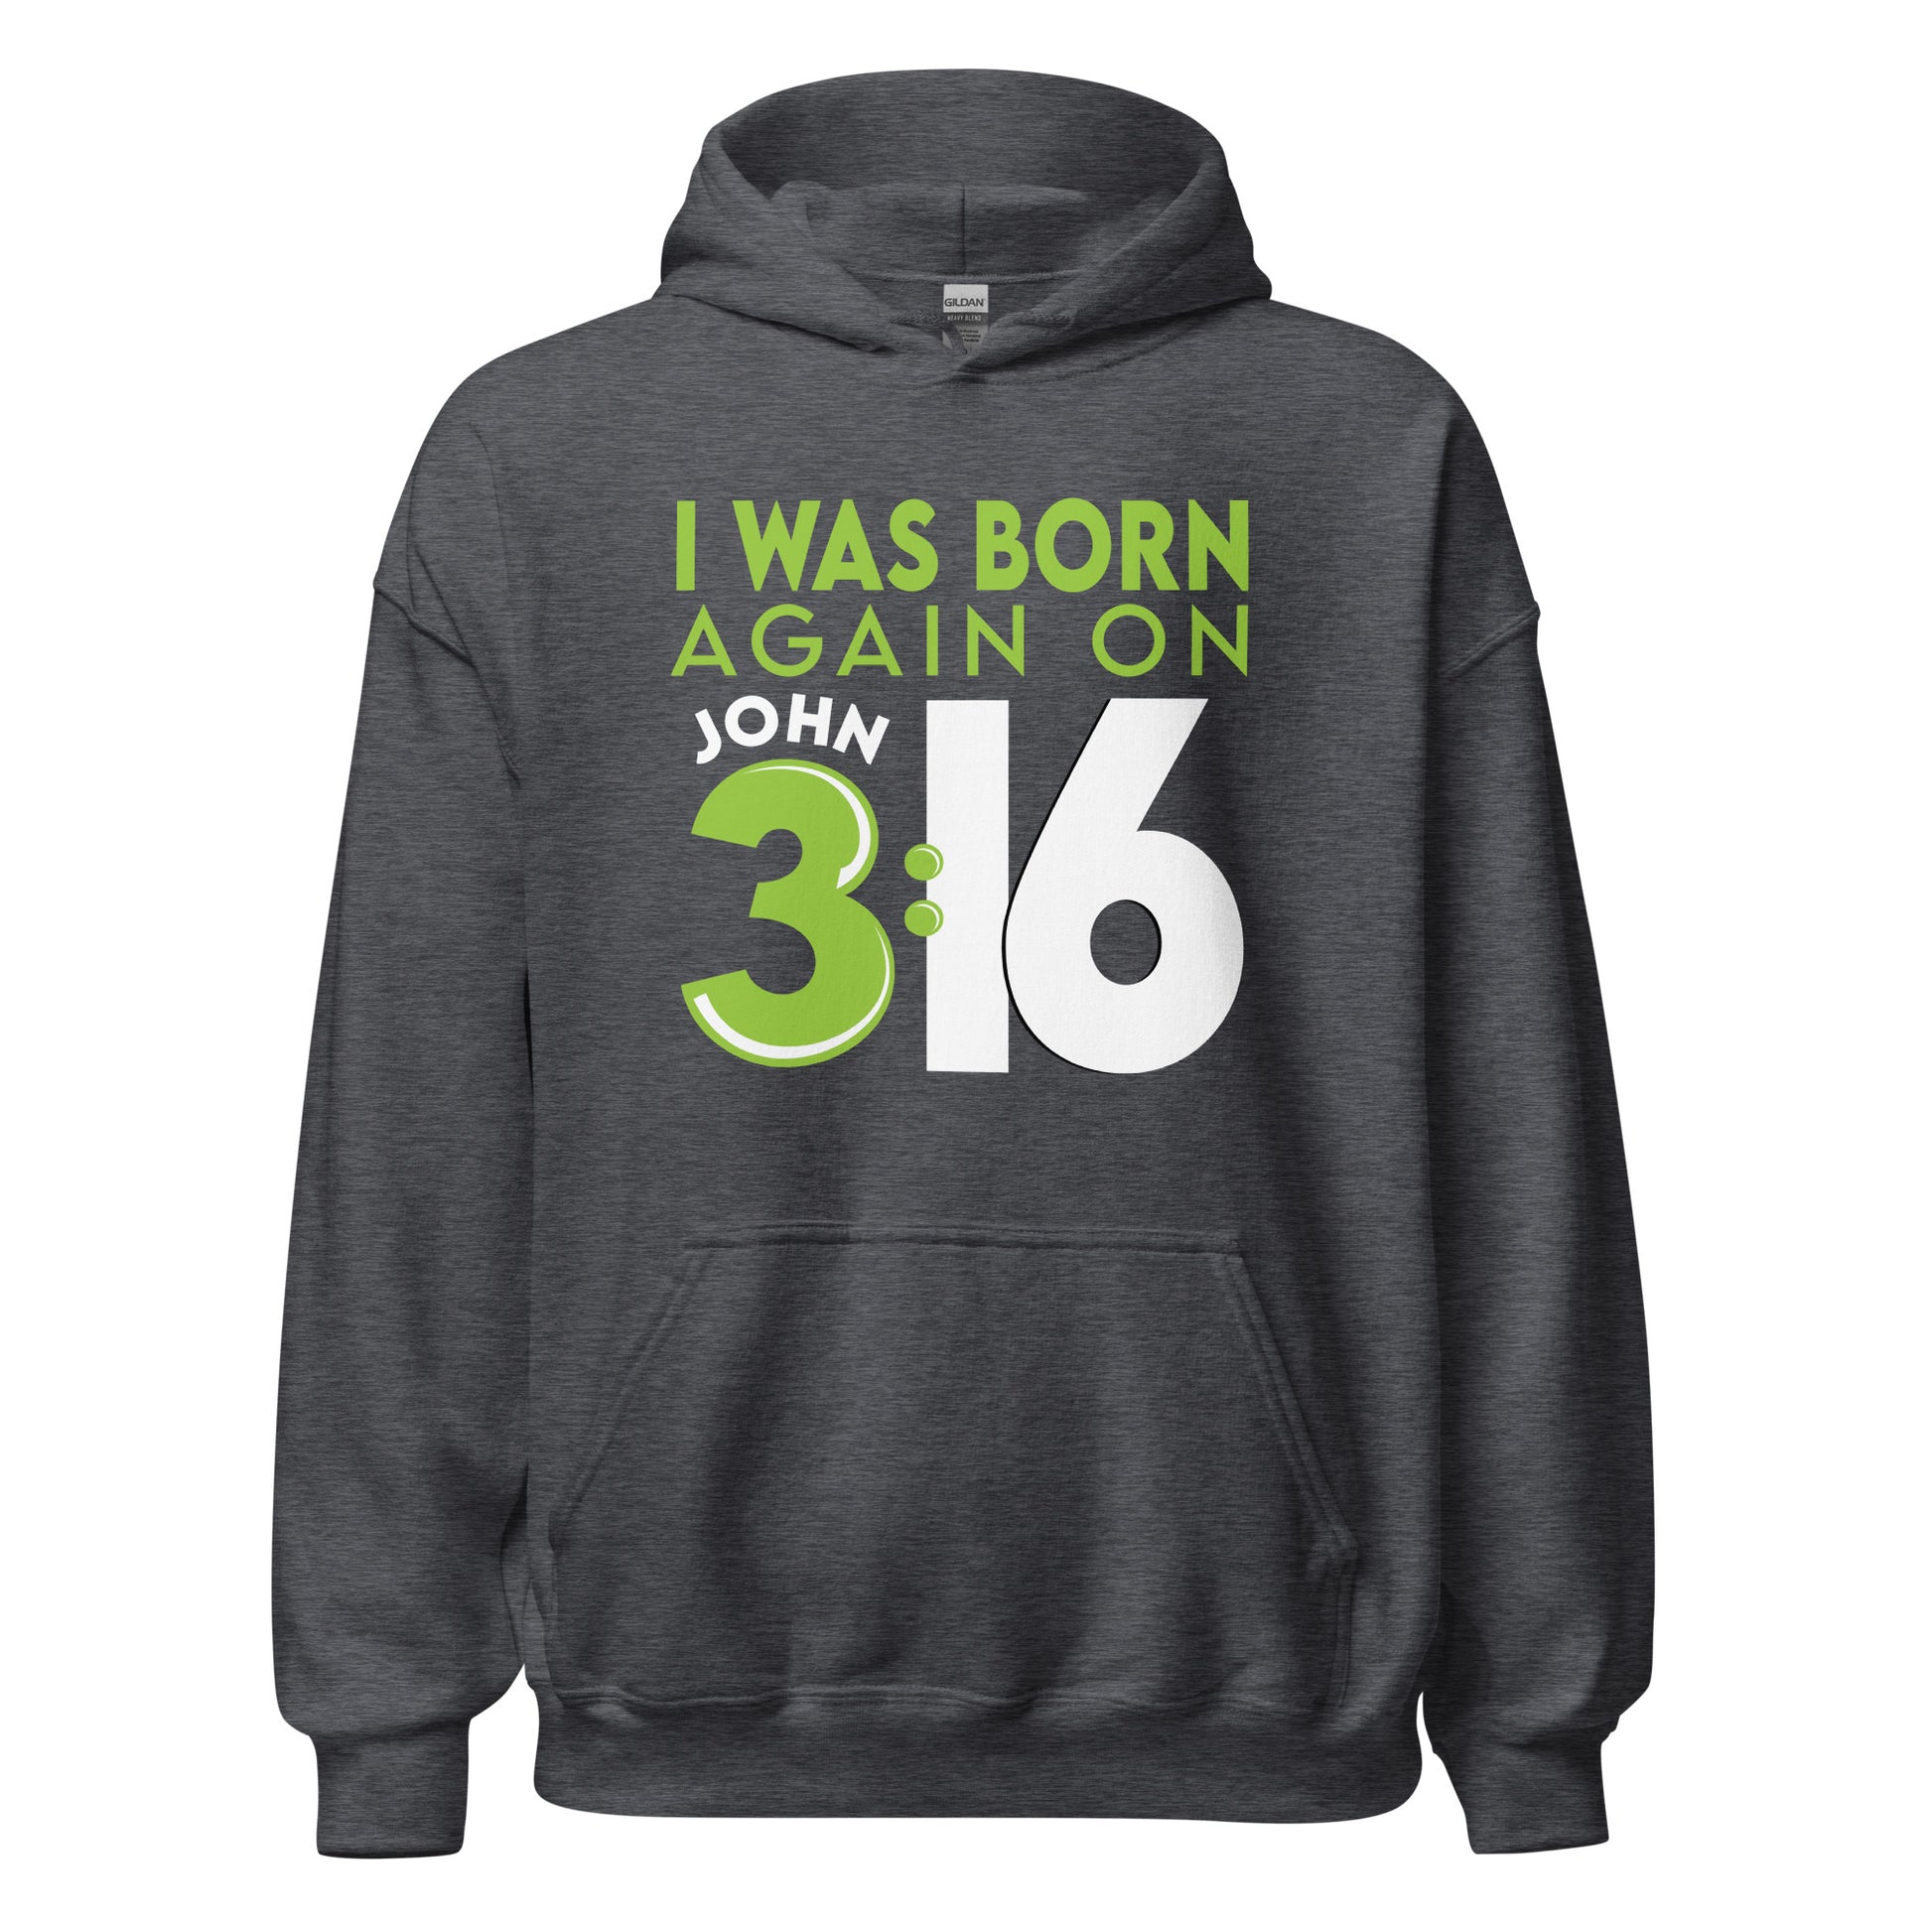 Heather Dark Gray Unisex Cozy Hoodie with Christian aesthetic bible verse message that says, "I Was Born Again On John 3:16" bible verse quote in lime green and white for men and women